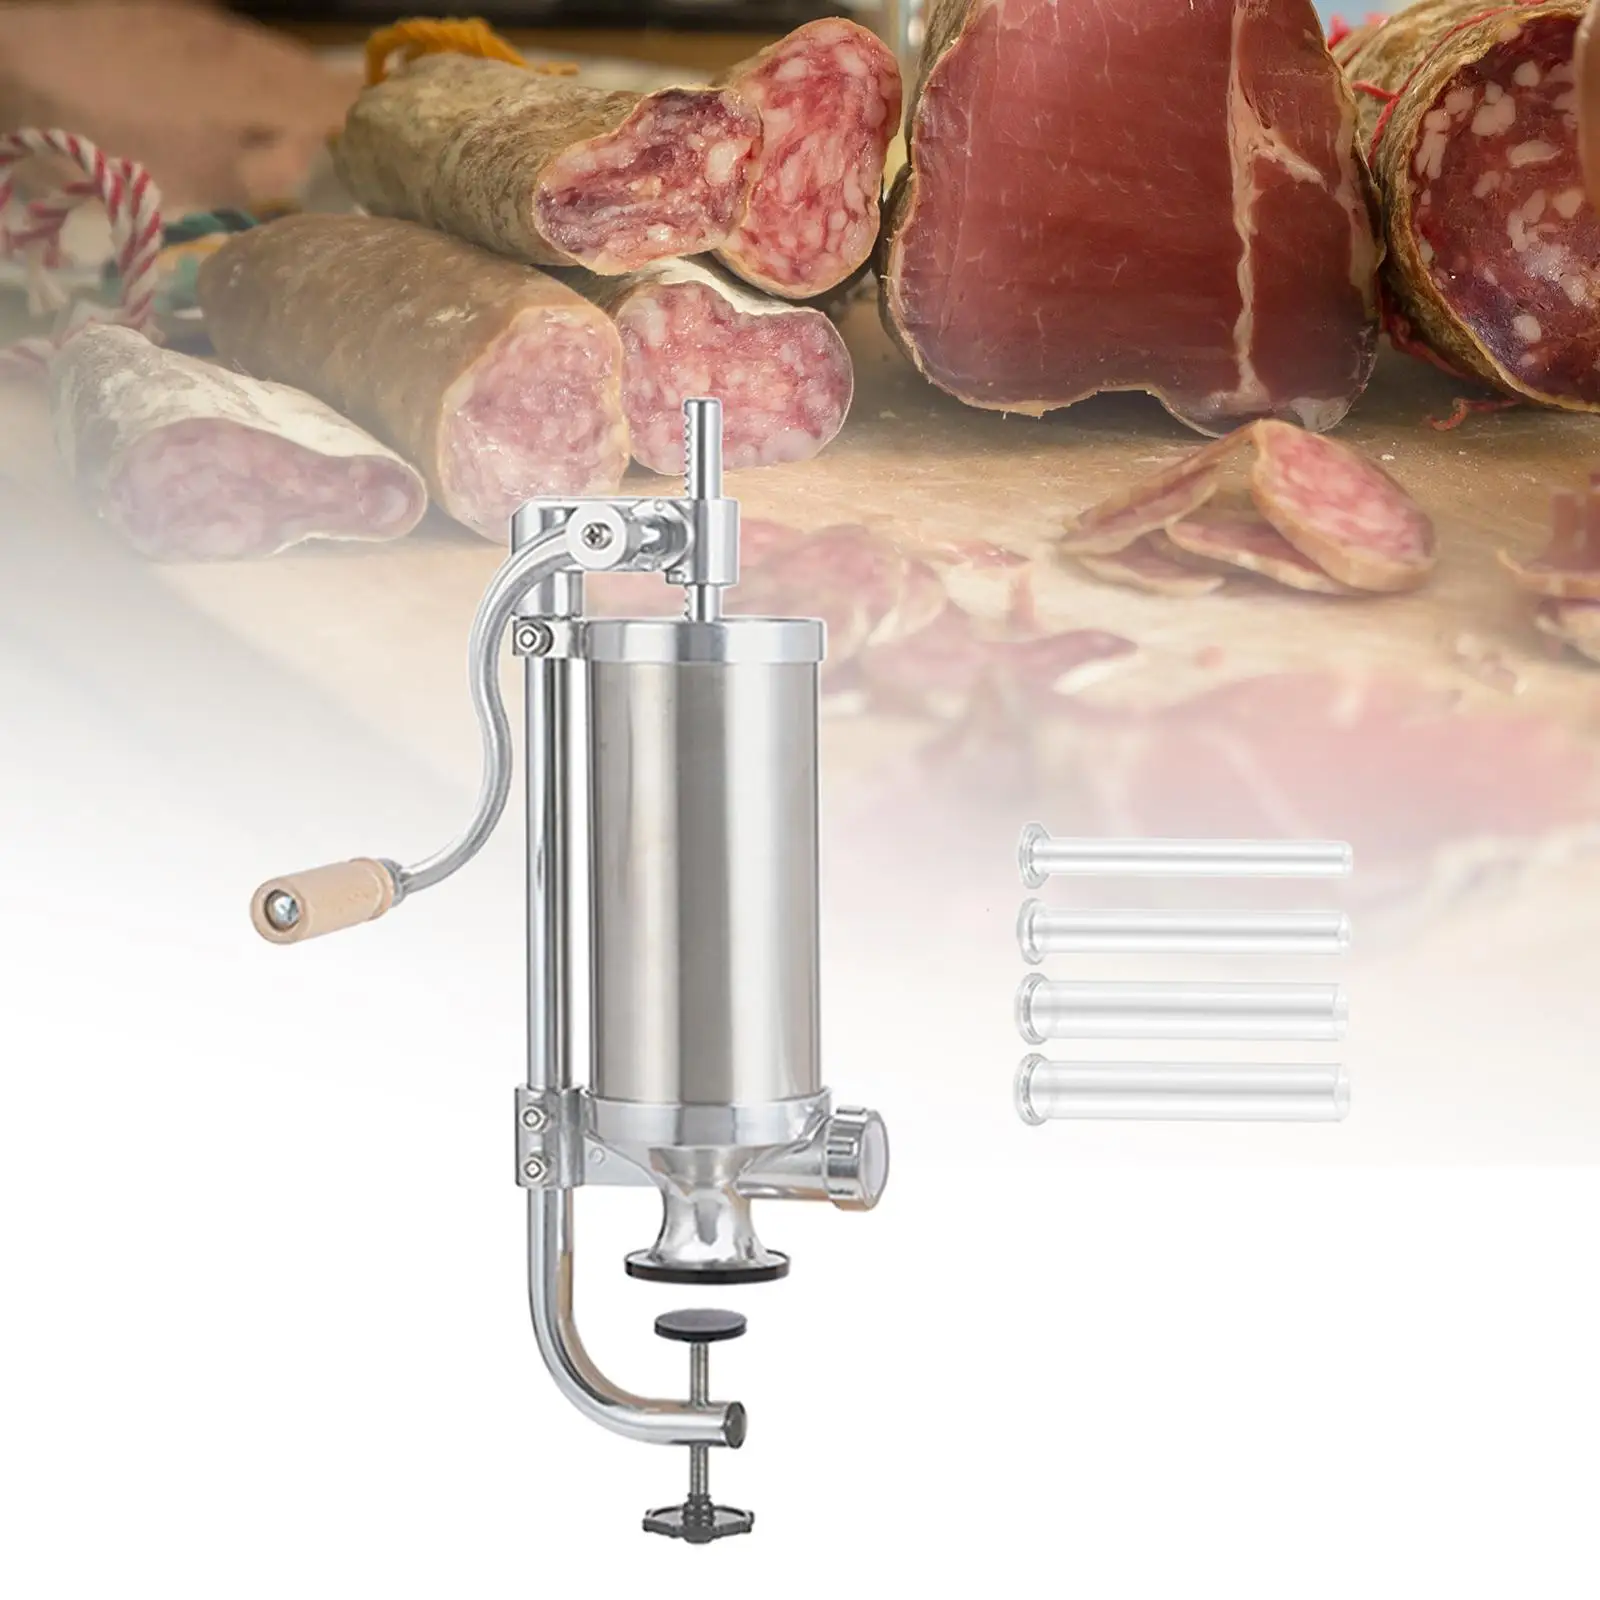 Manual Sausage Maker 2.5lbs Effective Salami Maker Kitchen Accessories with 4 Nozzles Meat Filler Machine Sausage Making Tool